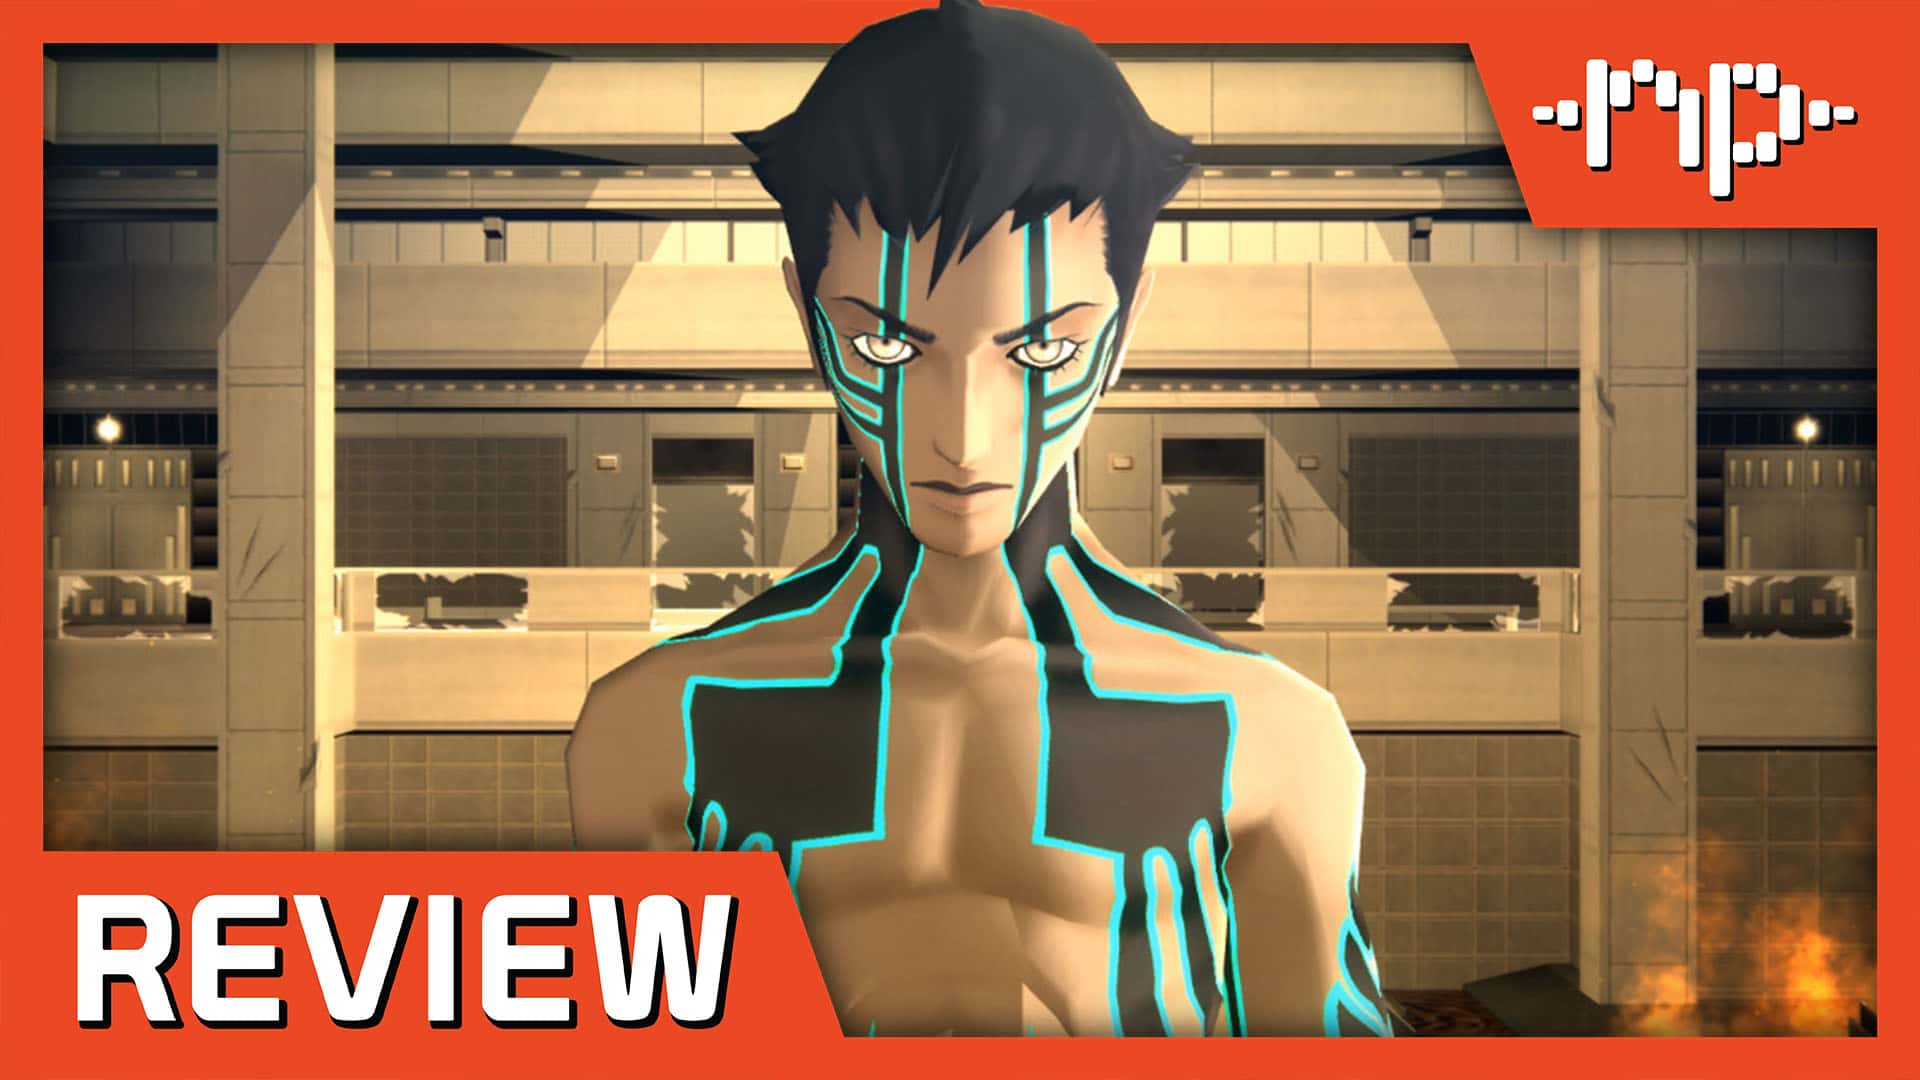 Yes, Shin Megami Tensei 3: Nocturne HD Remaster features Dante from the Devil  May Cry series